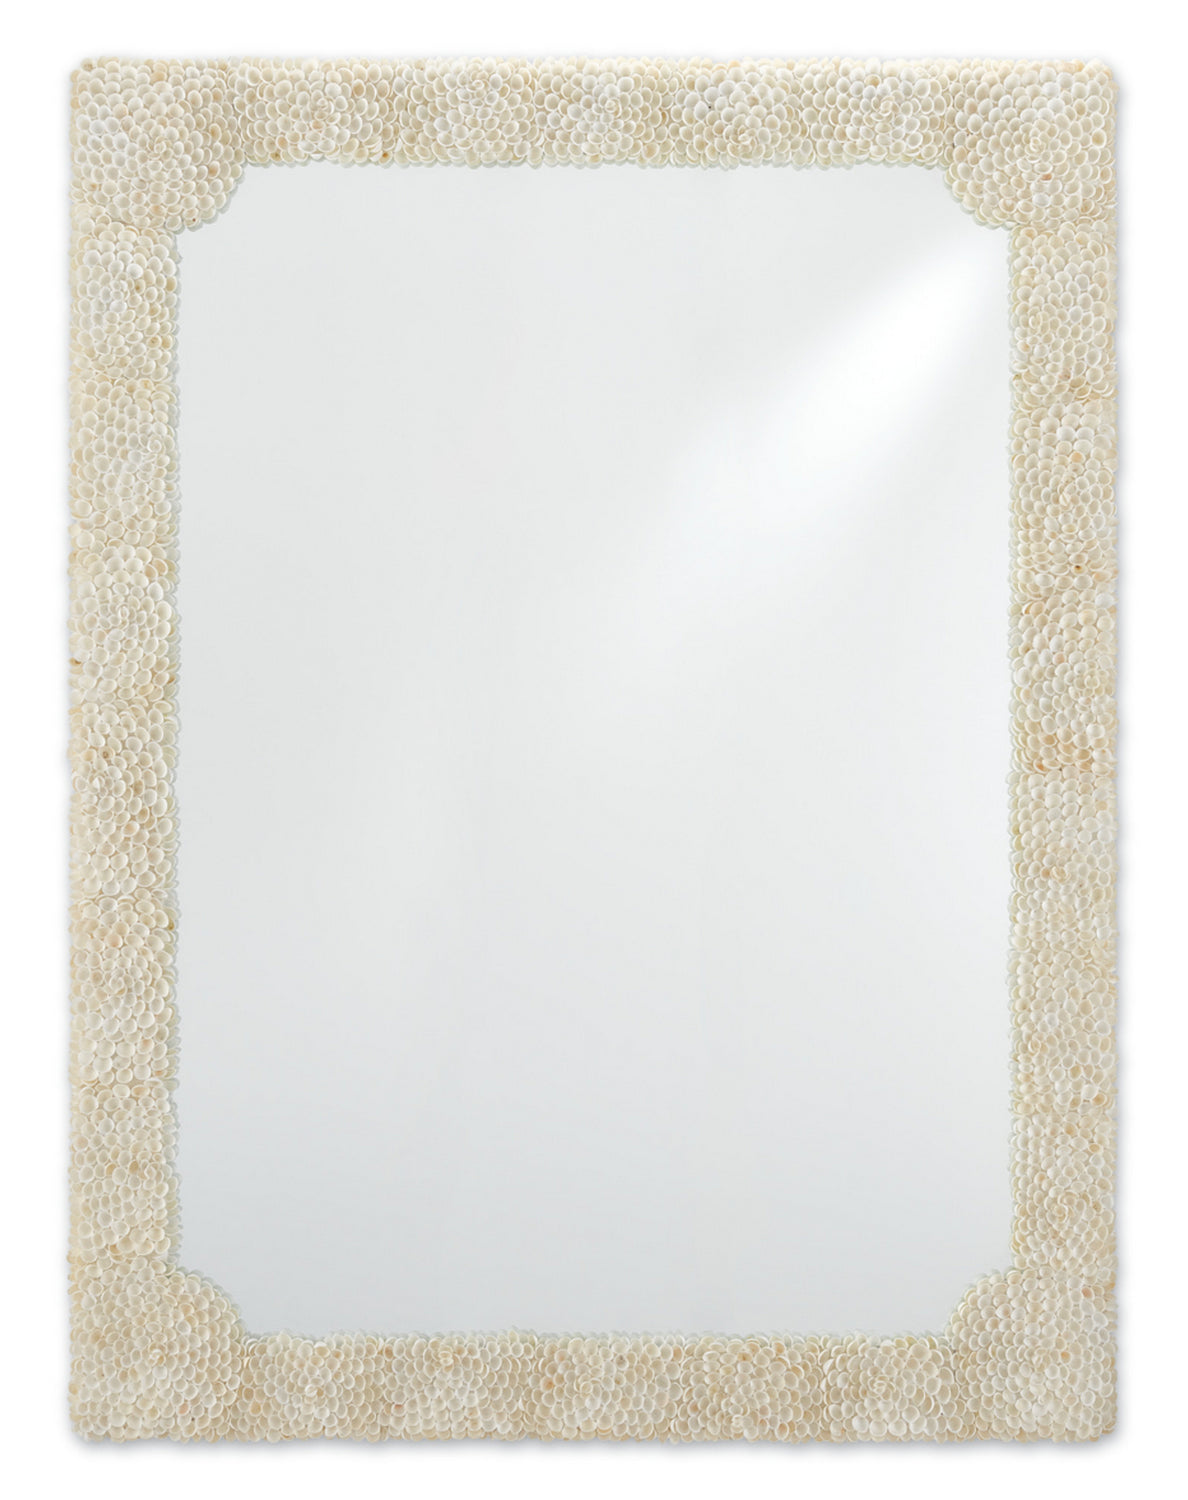 Mirror from the Leena collection in Natural Clam Rose Shells/Mirror finish